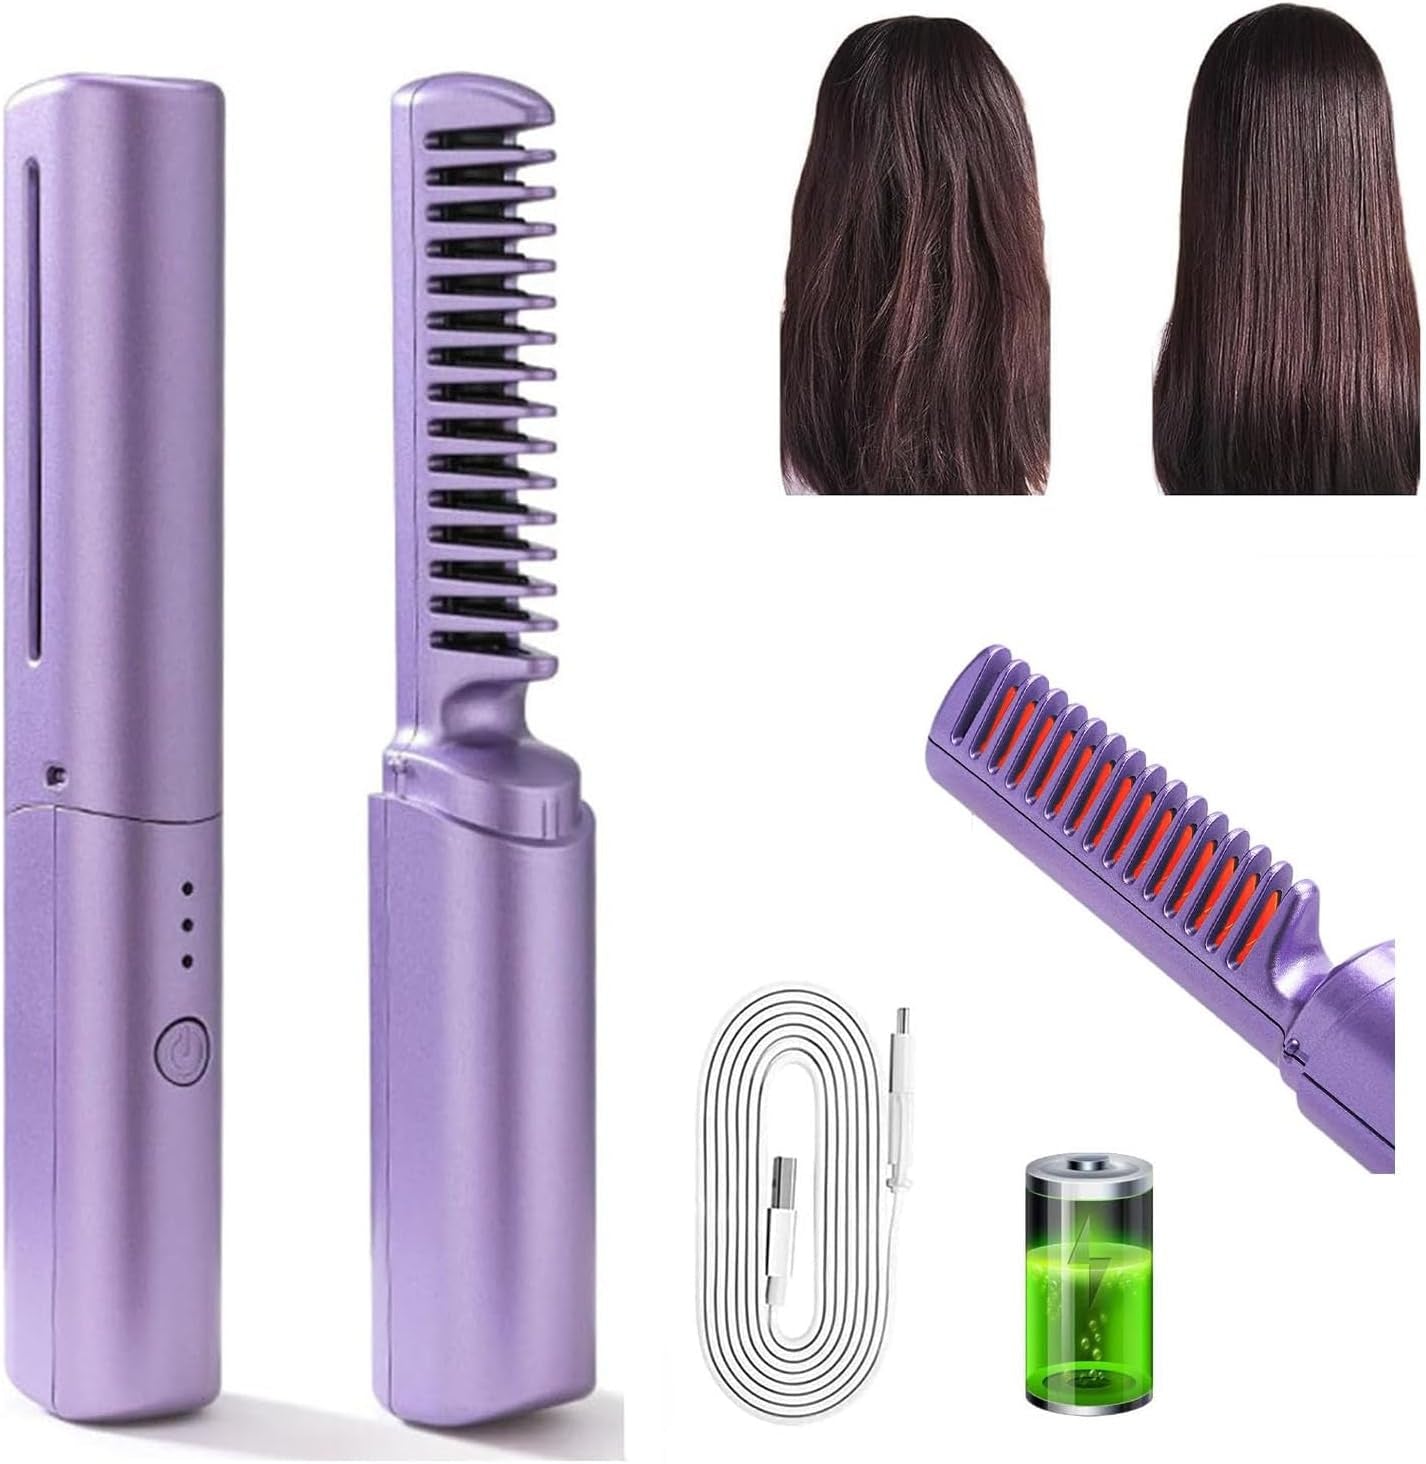 Rechargeable Mini Hair Straightener, Portable Cordless Hair Straightener, Portable Straightening Brush with Negative Ion, Lightweight & Mini for Travel, Hot Comb Hair Straightener for Women